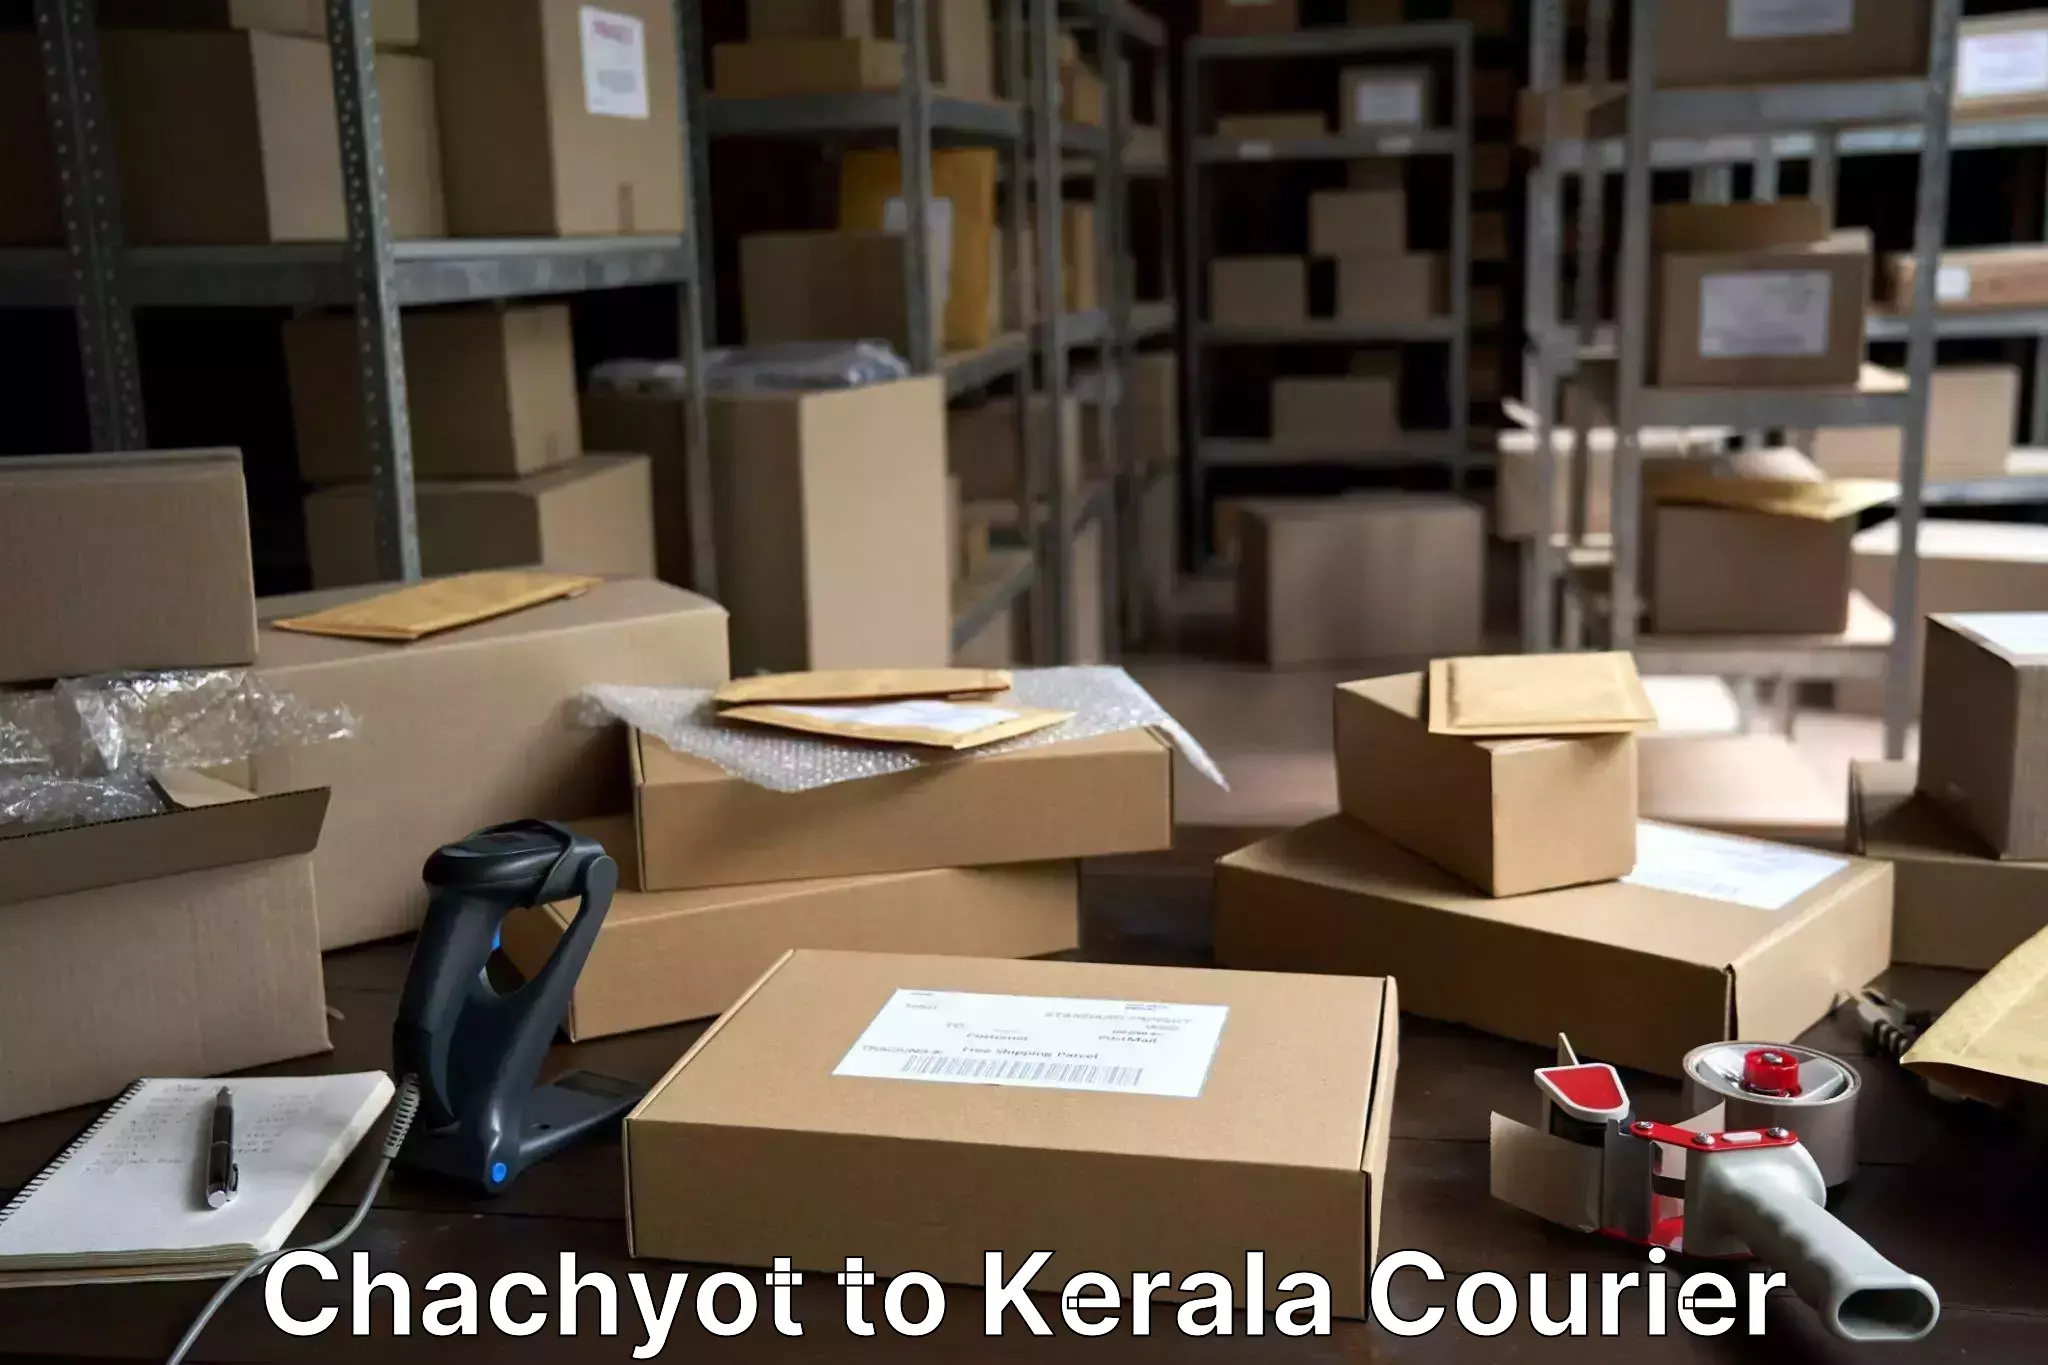 Door to door luggage delivery Chachyot to Kozhikode